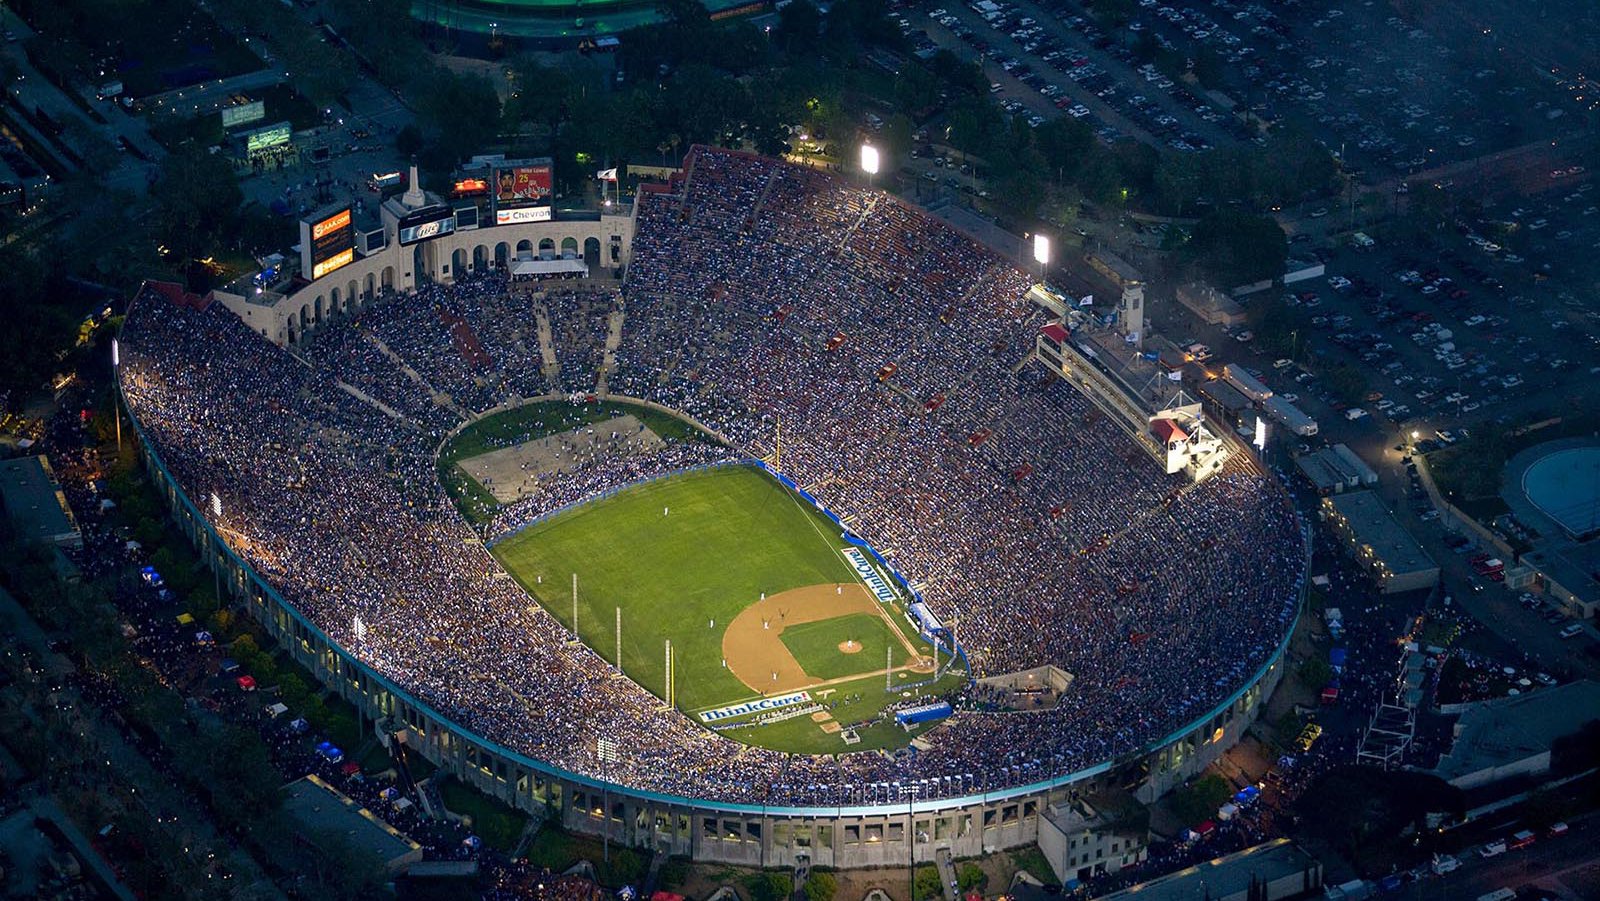 Sports photograph of the LA Memorial Coliseum during the 50th Anniversary baseball match between the Boston Red Sox and the Los Angeles Dodgers